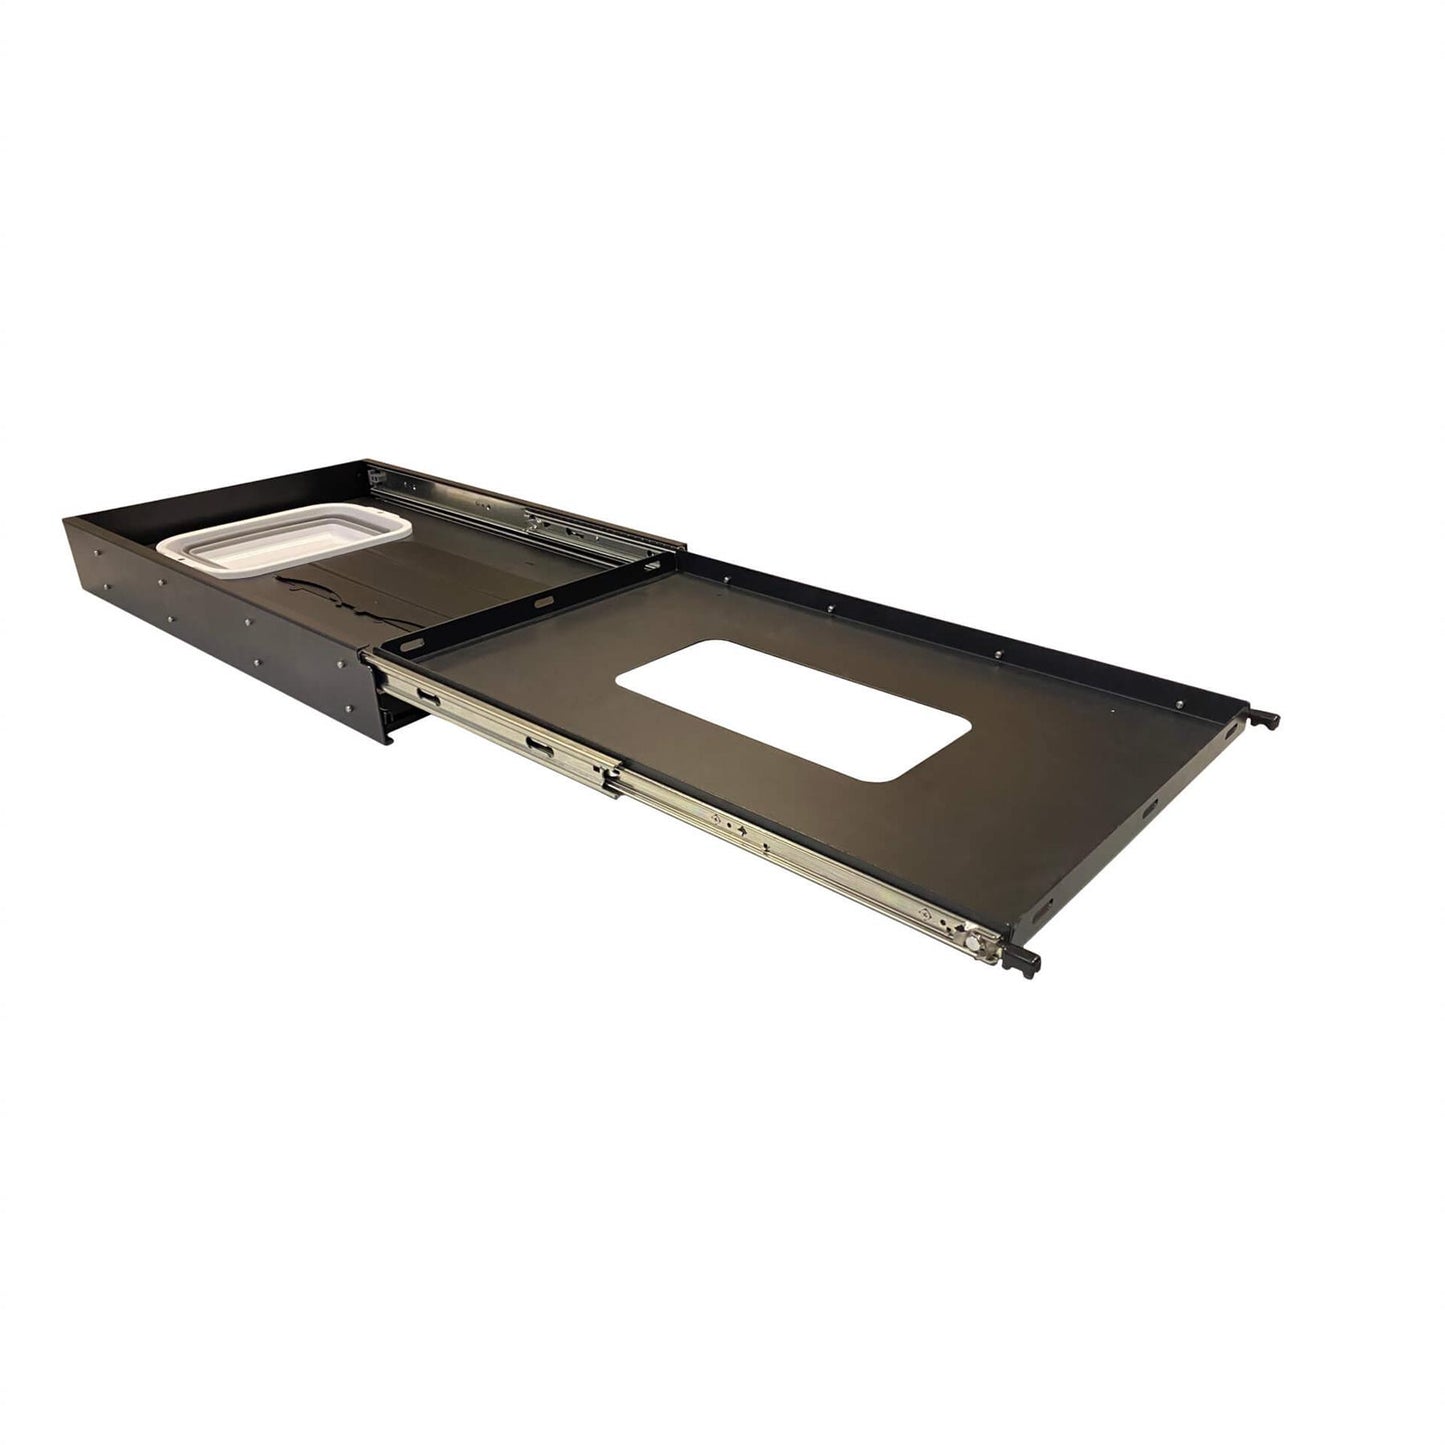 Extendable Heavy-Duty Vehicle Camping Utility Slide Tray with Integrated Sink